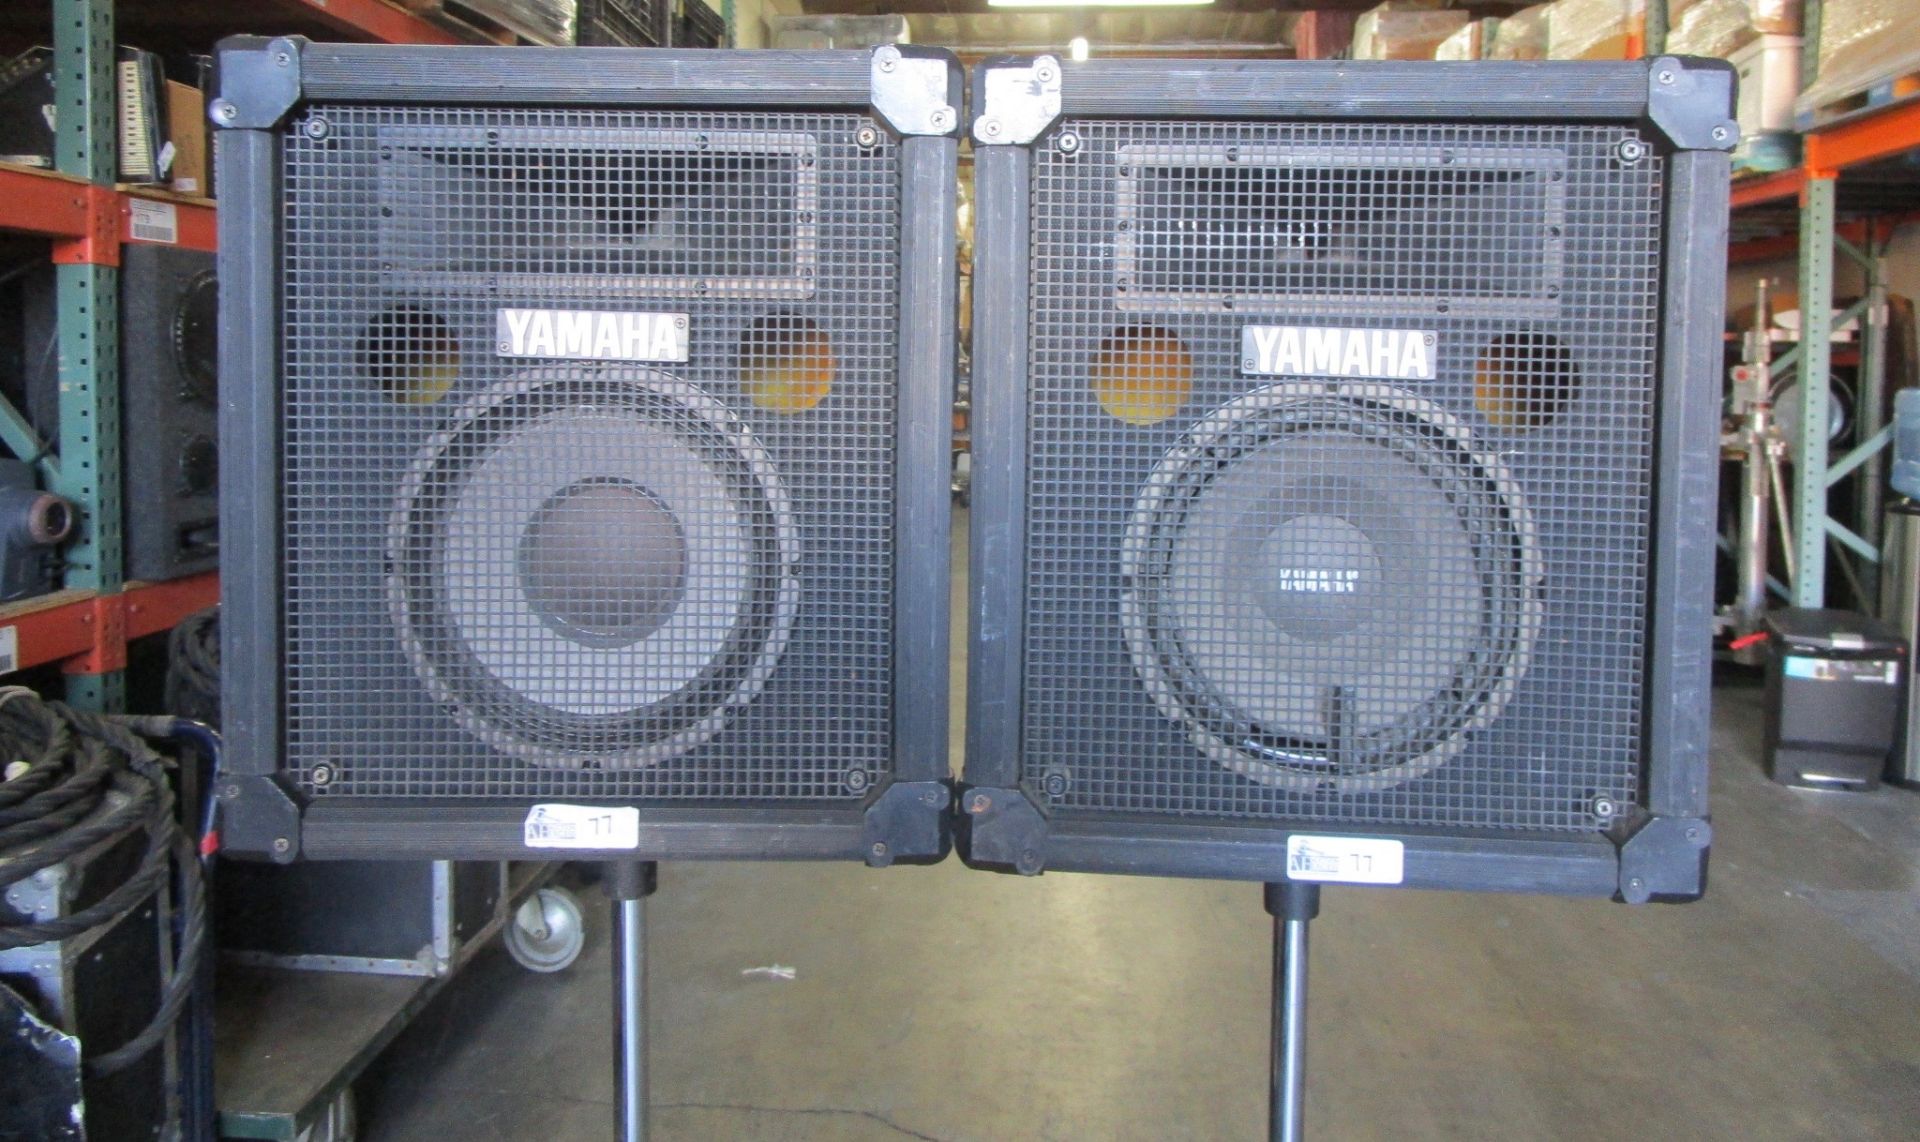 LOT OF 2 YAMAHA SPEAKERS ON STANDS - Image 5 of 8